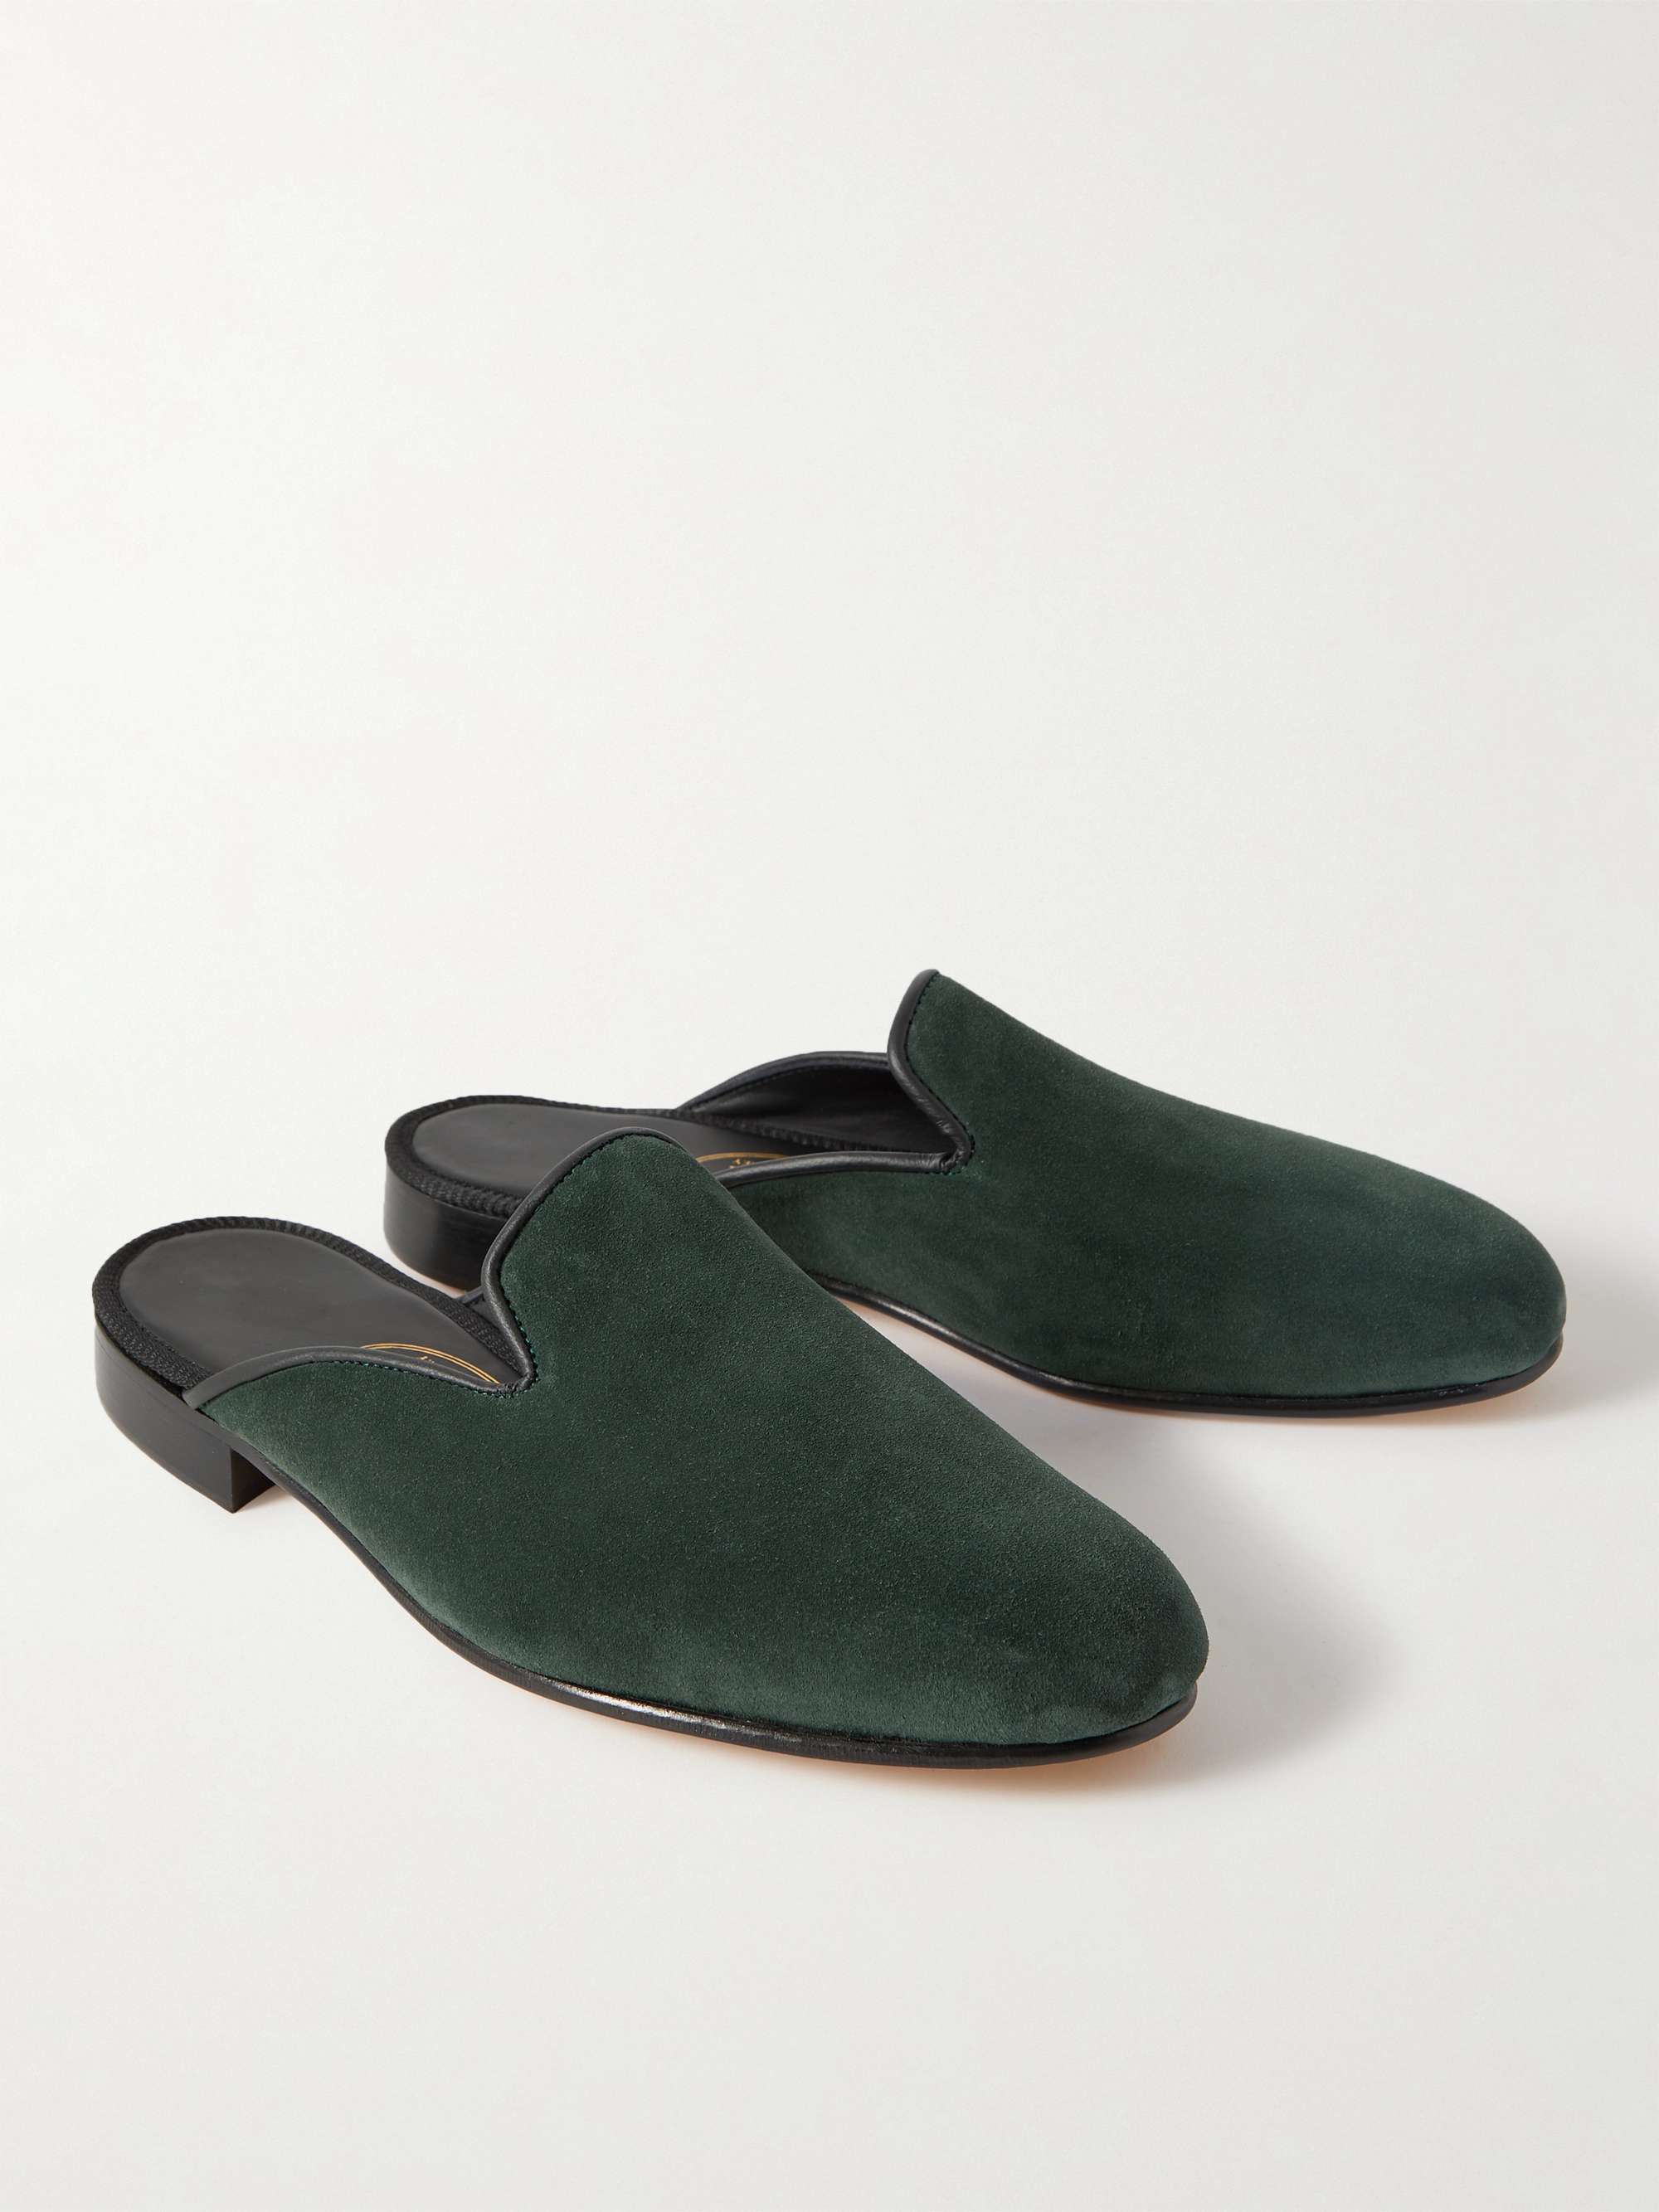 GEORGE CLEVERLEY Leather-Trimmed Suede Backless Loafers